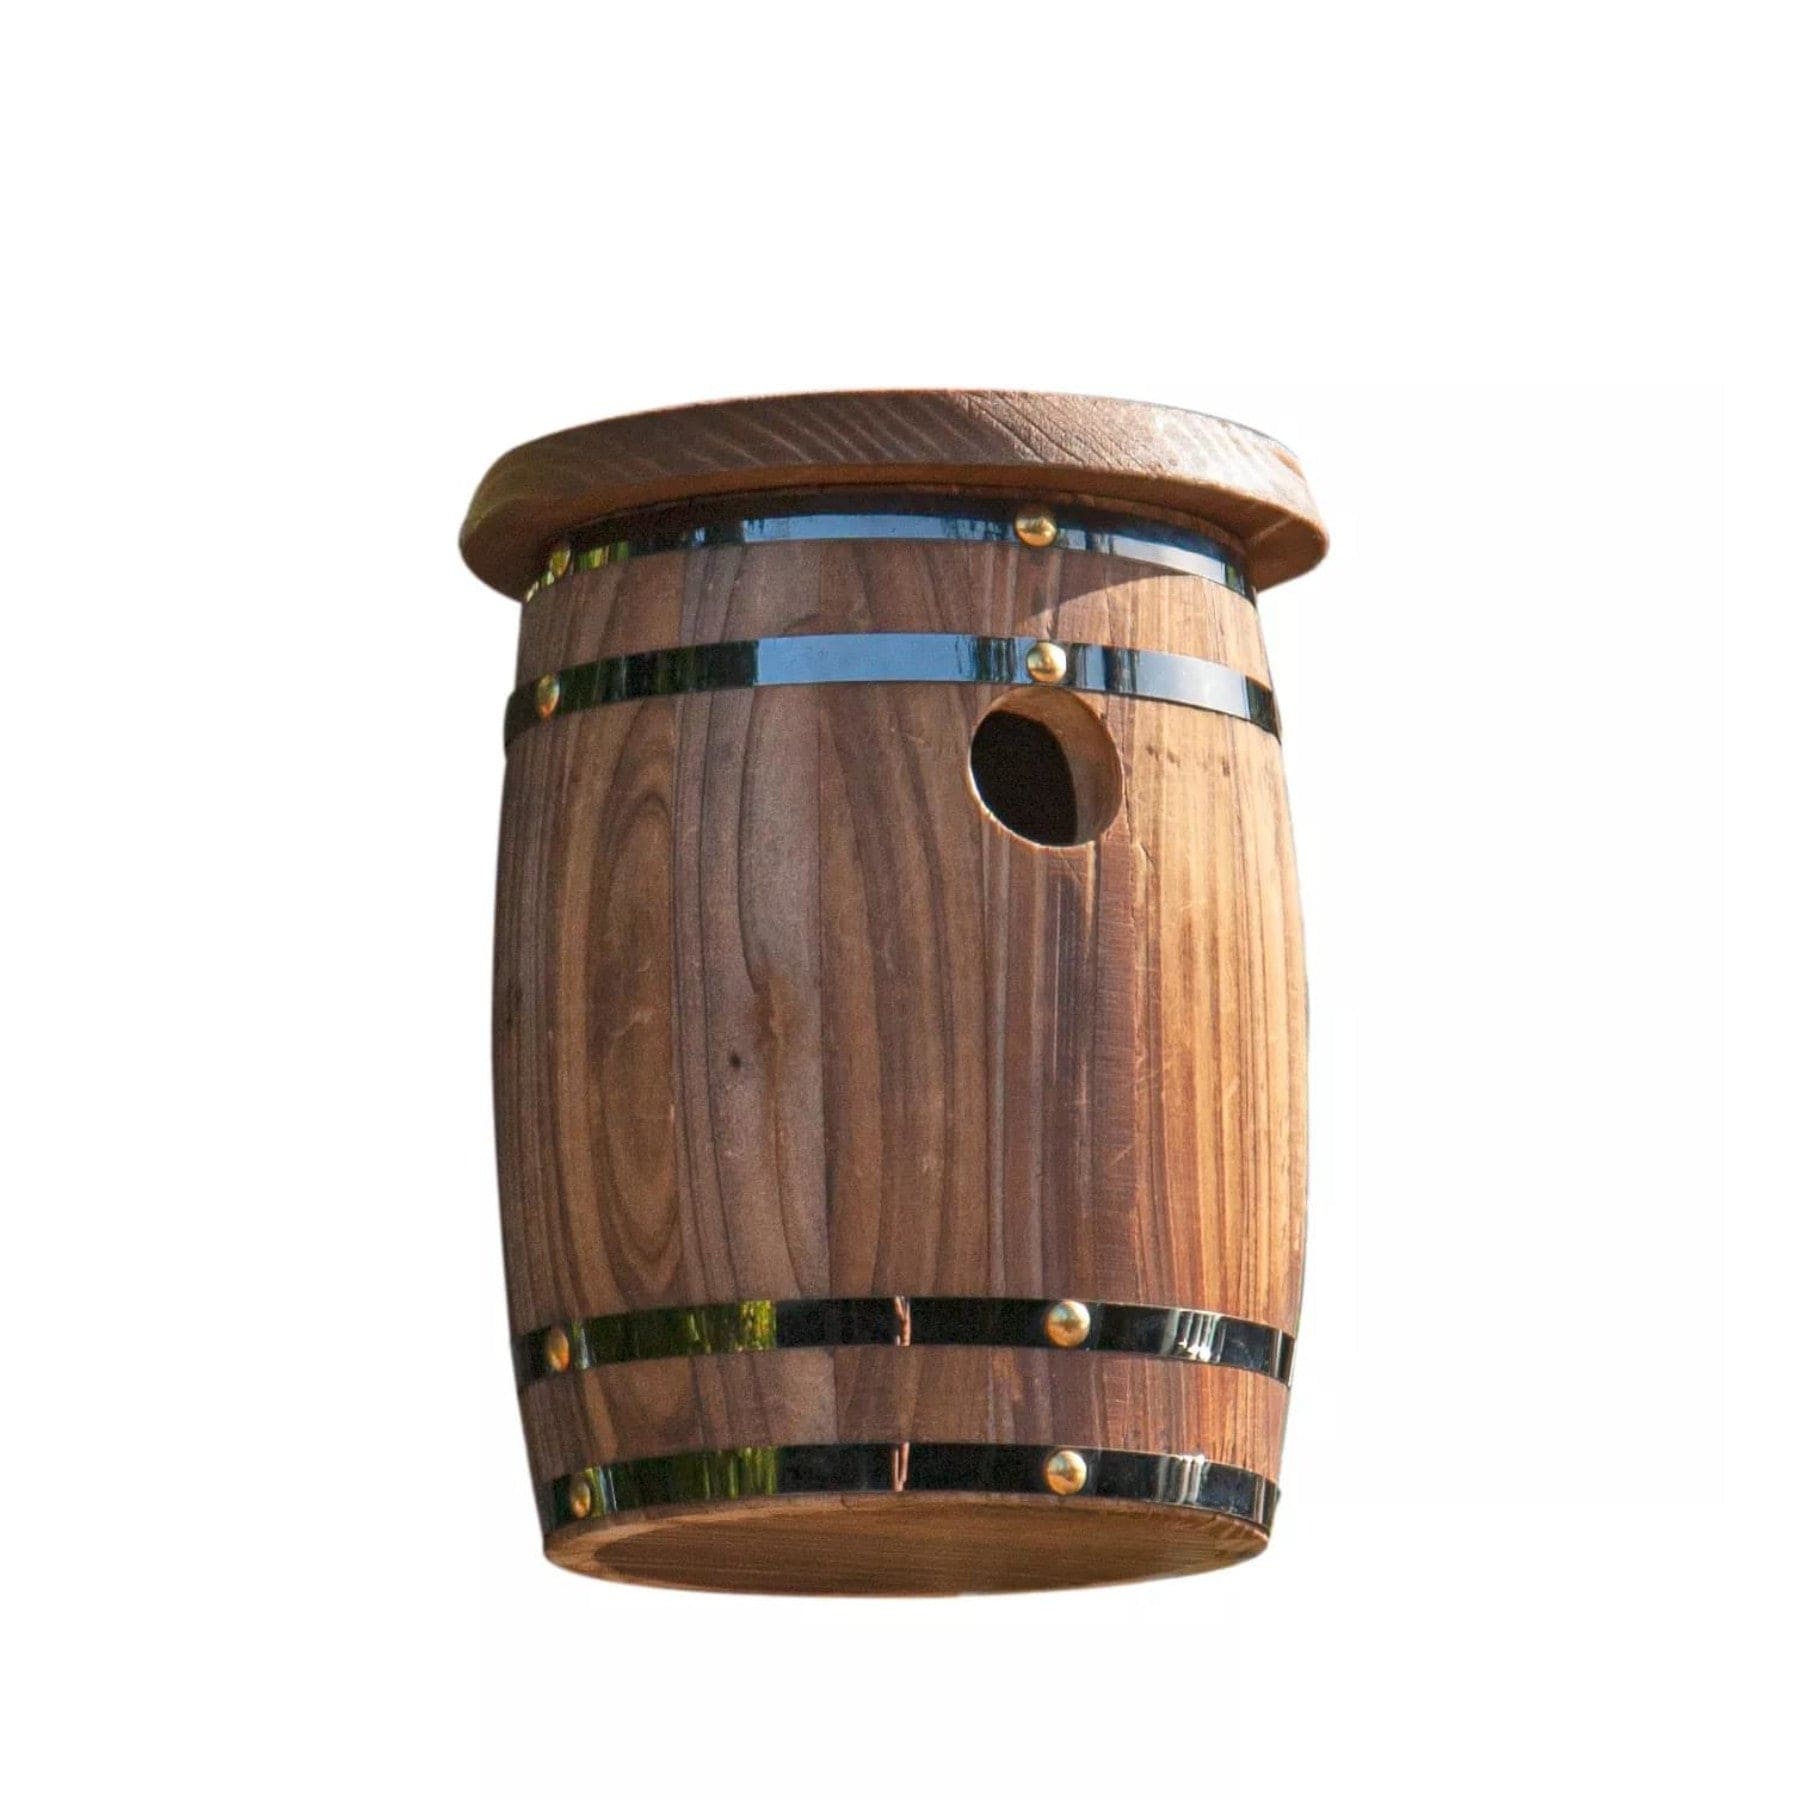 Wooden birdhouse designed like a wine barrel with entrance hole, hanging against a white background.